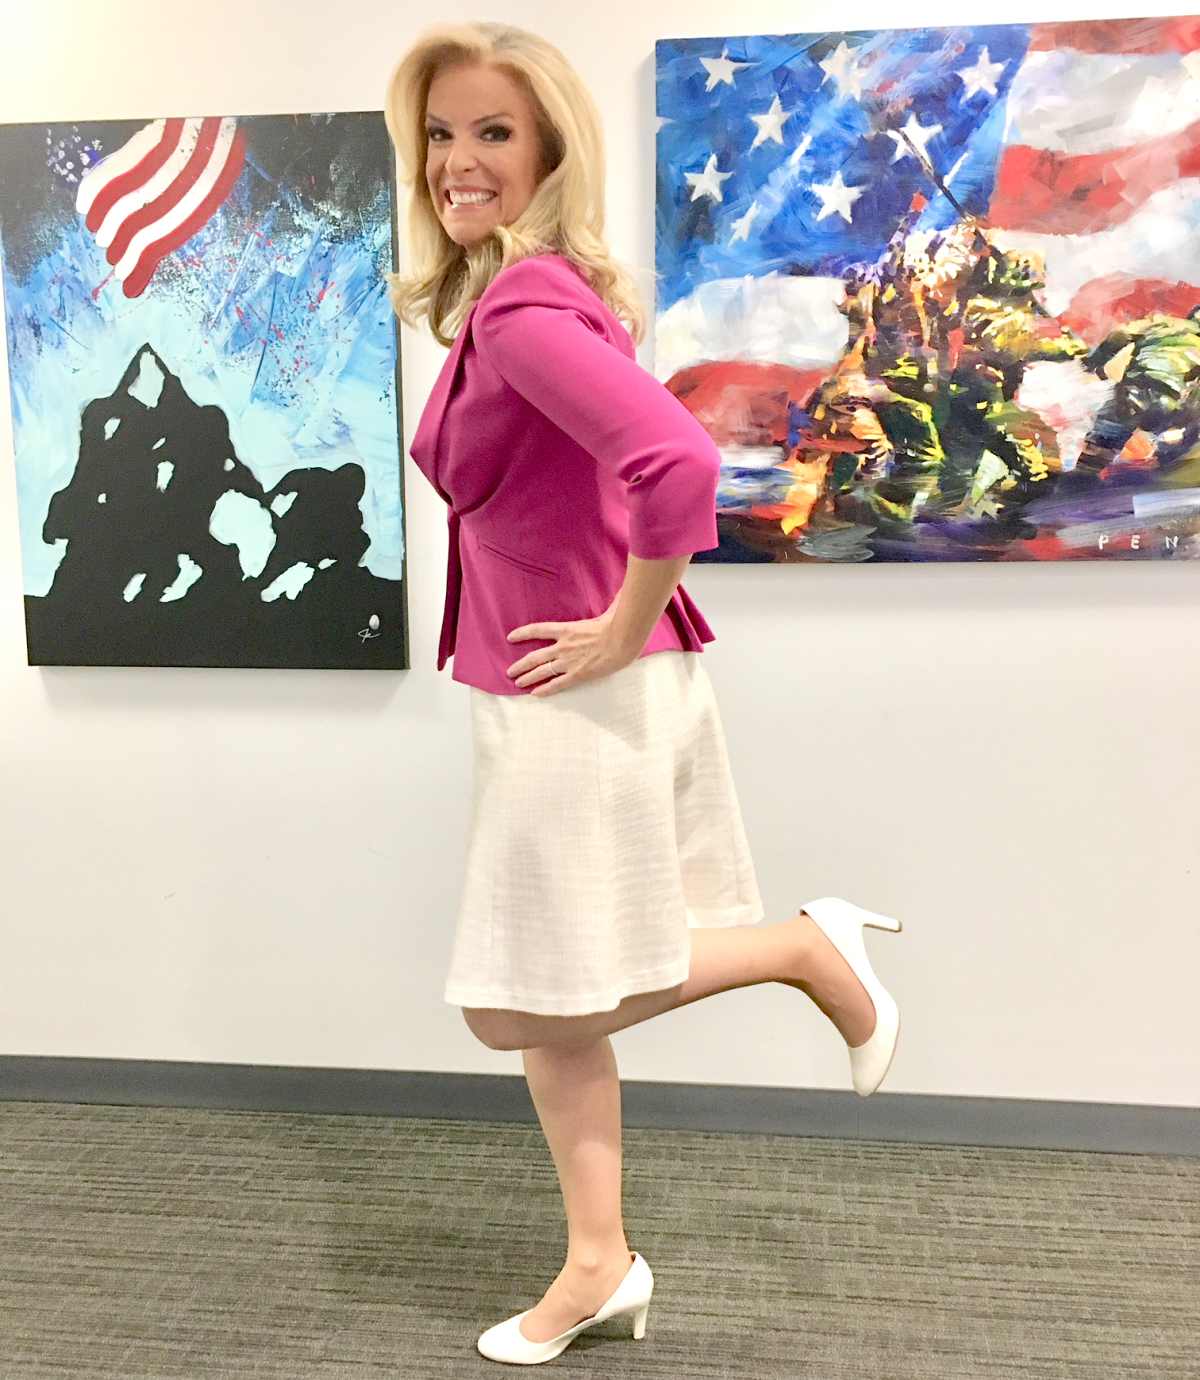 Janice Dean Responds to Troll Who Criticized Her Legs | Us Weekly